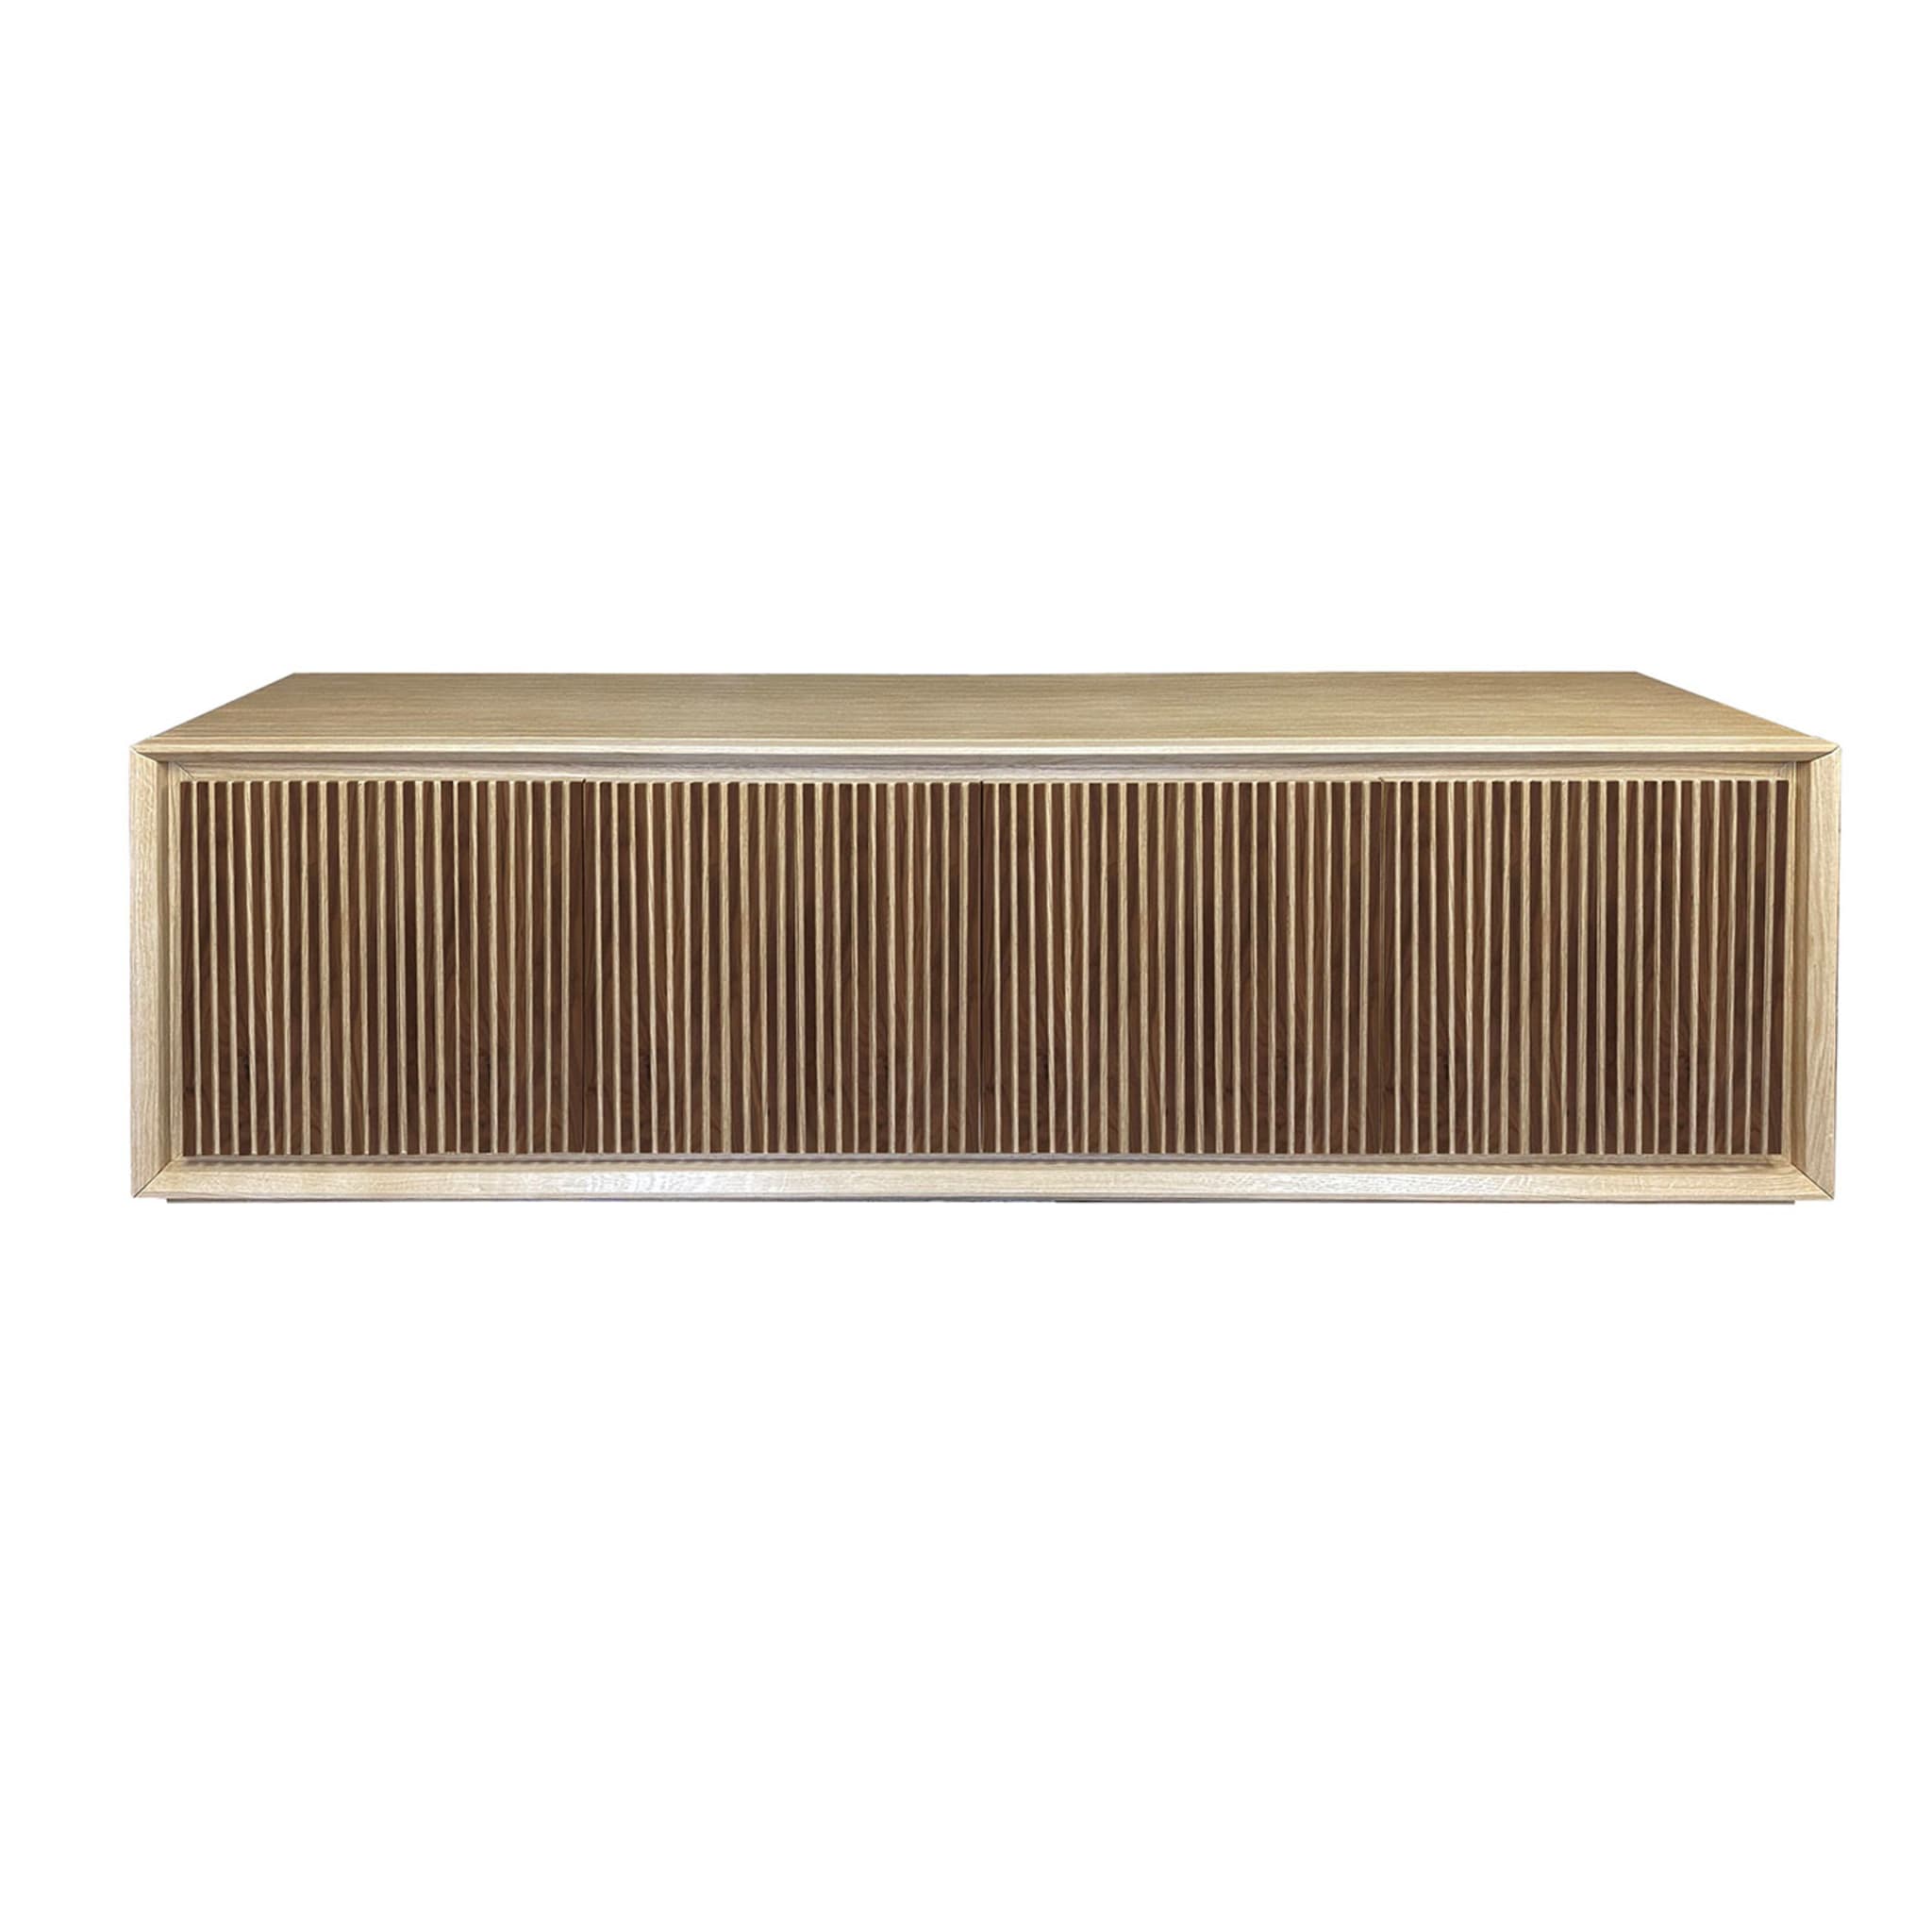 Fuga Noce Due 4-Door Grooved Sideboard by Mascia Meccani - Alternative view 1